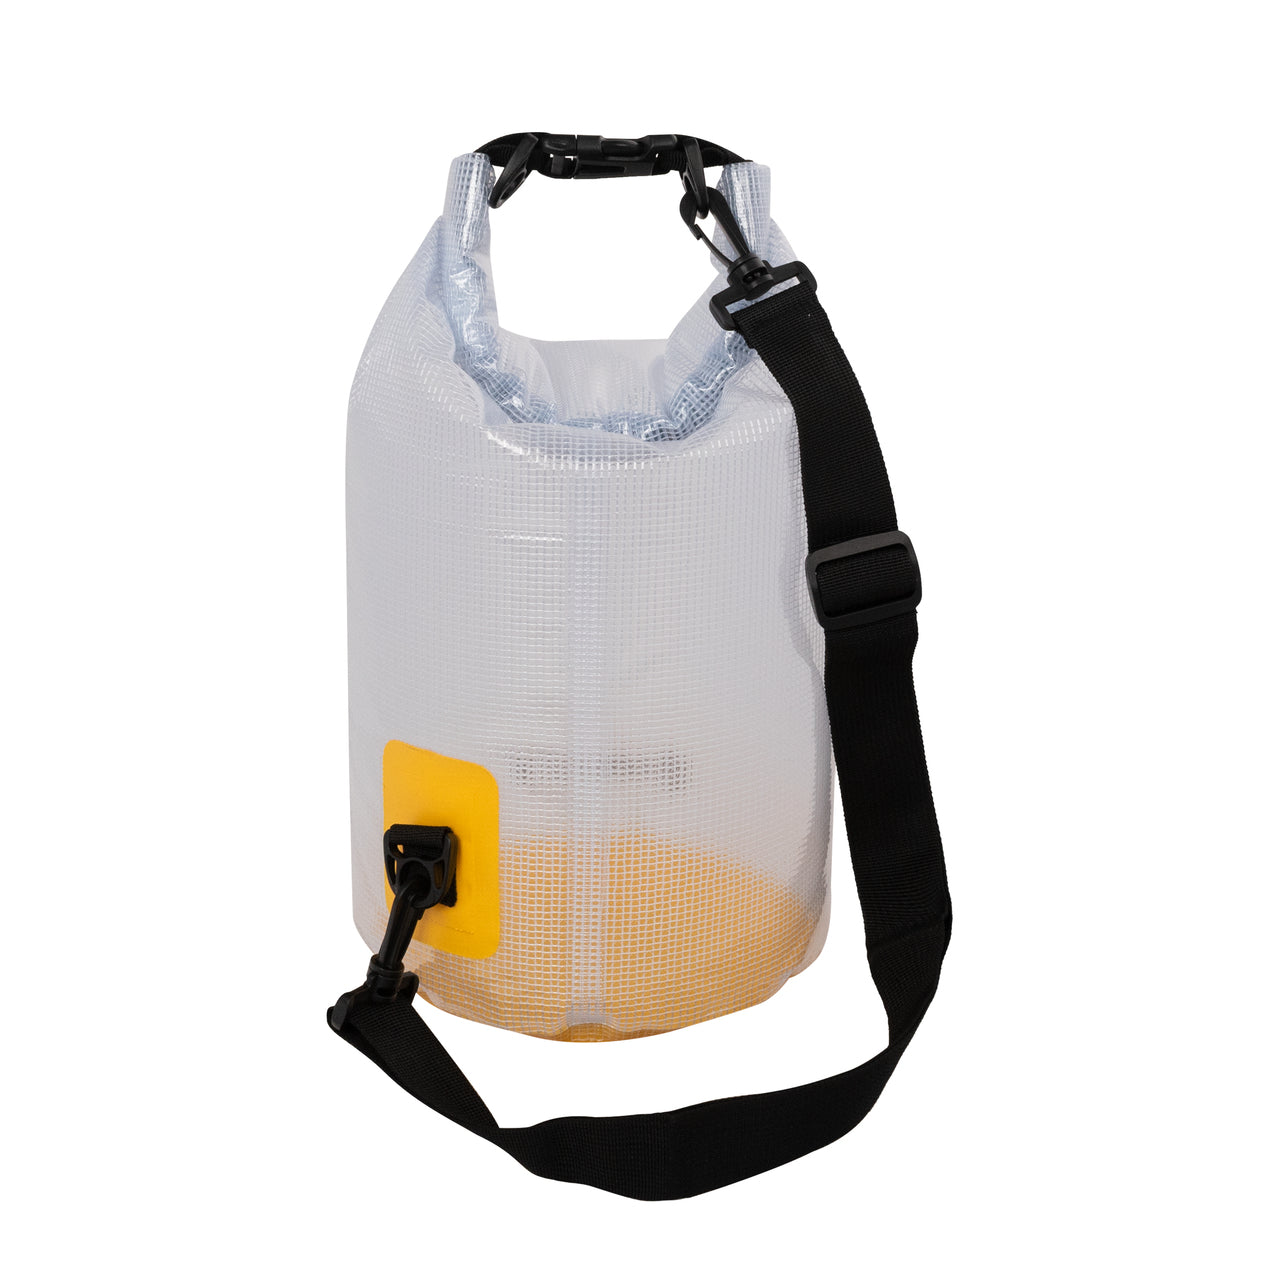 TrailGear 10 liter Heavy-Duty Transparent Dry Bag in the yellow variation.